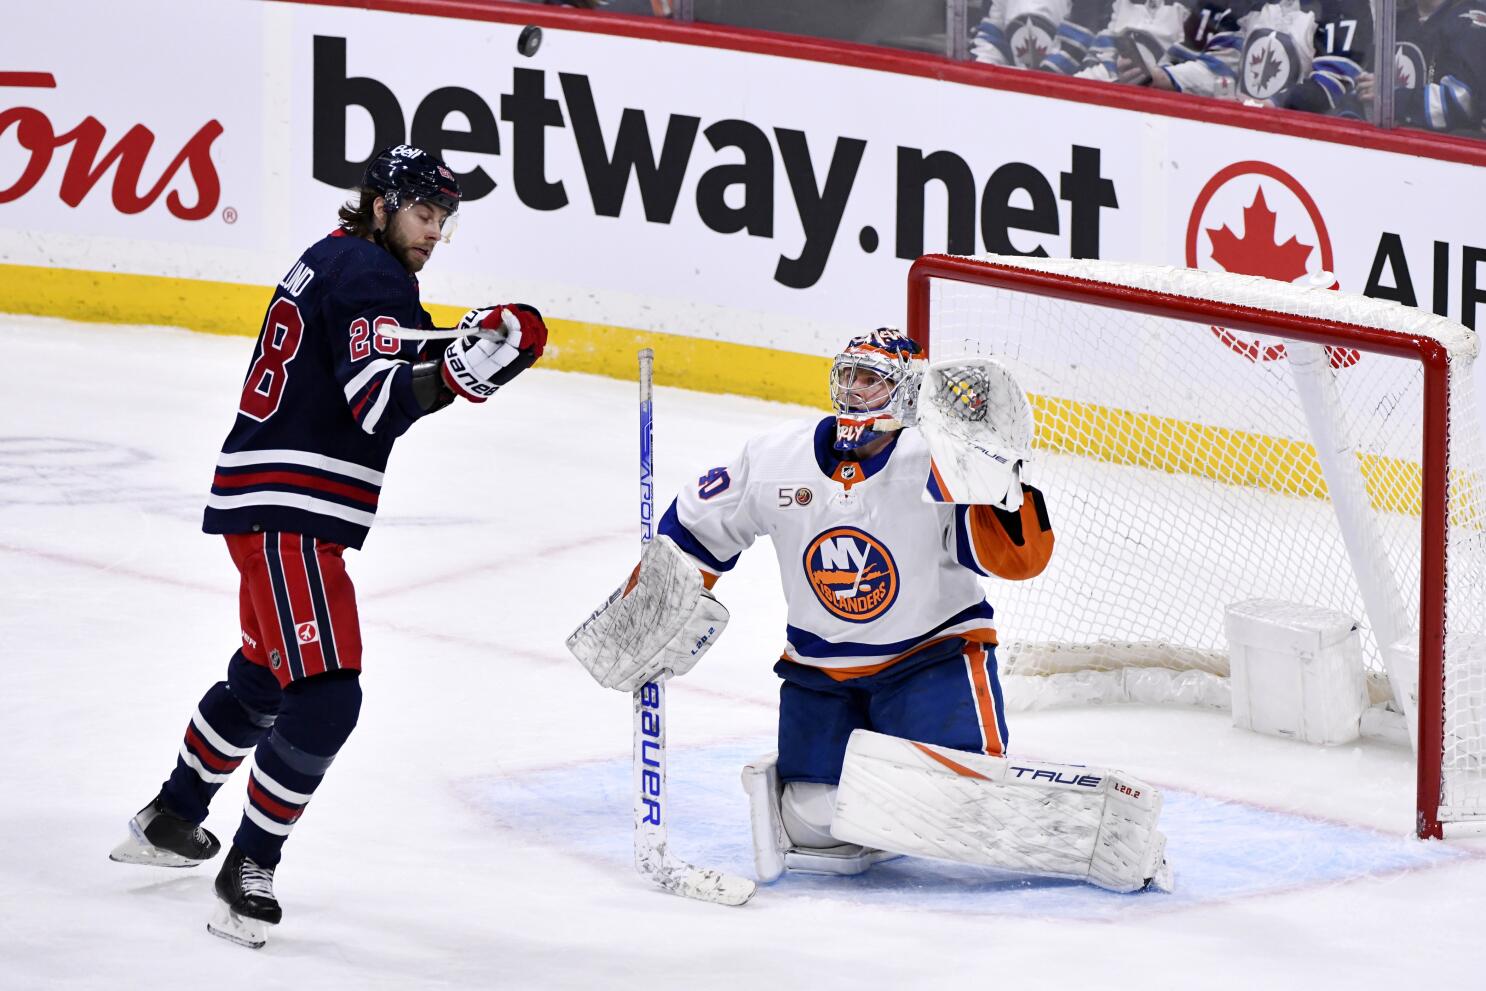 Semyon Varlamov likely to start in net for the Islanders on